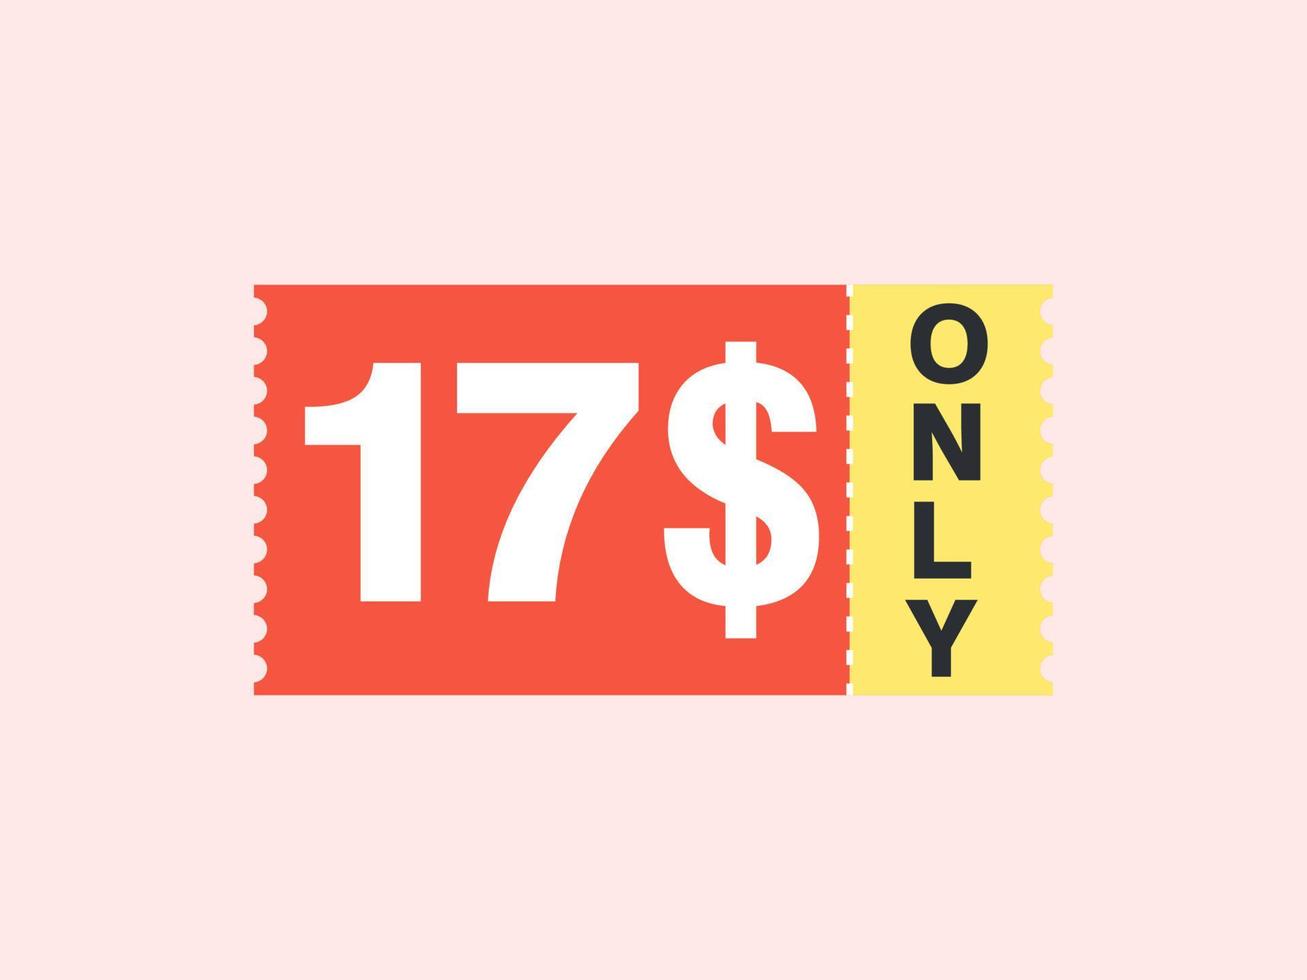 17 Dollar Only Coupon sign or Label or discount voucher Money Saving label, with coupon vector illustration summer offer ends weekend holiday